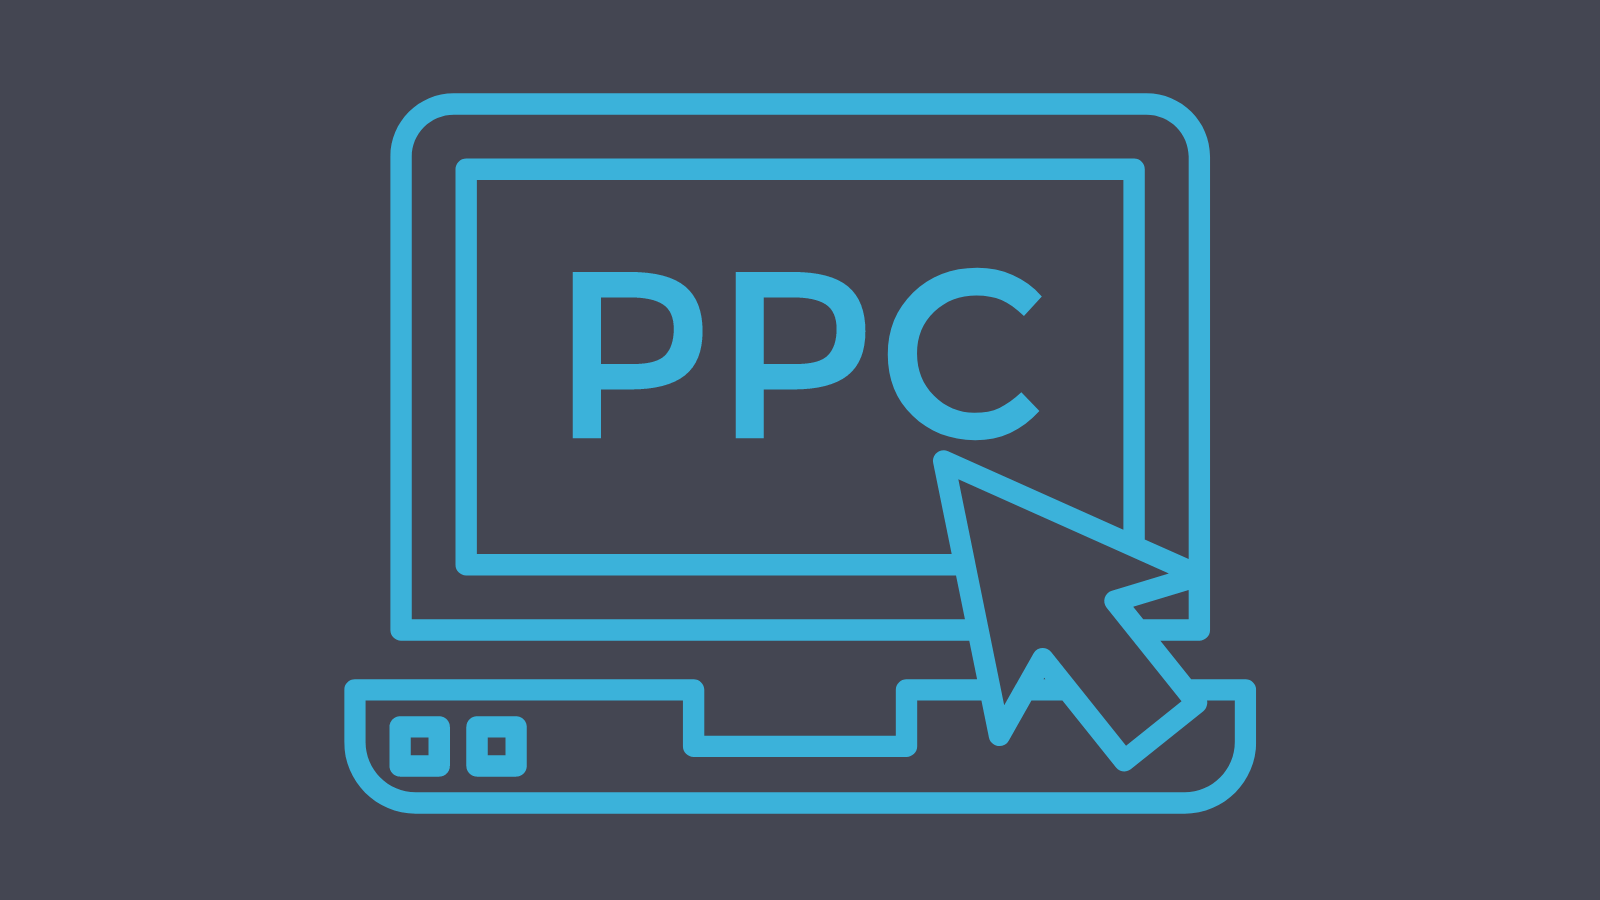 An icon of a laptop with PPC displayed in large letters on the screen